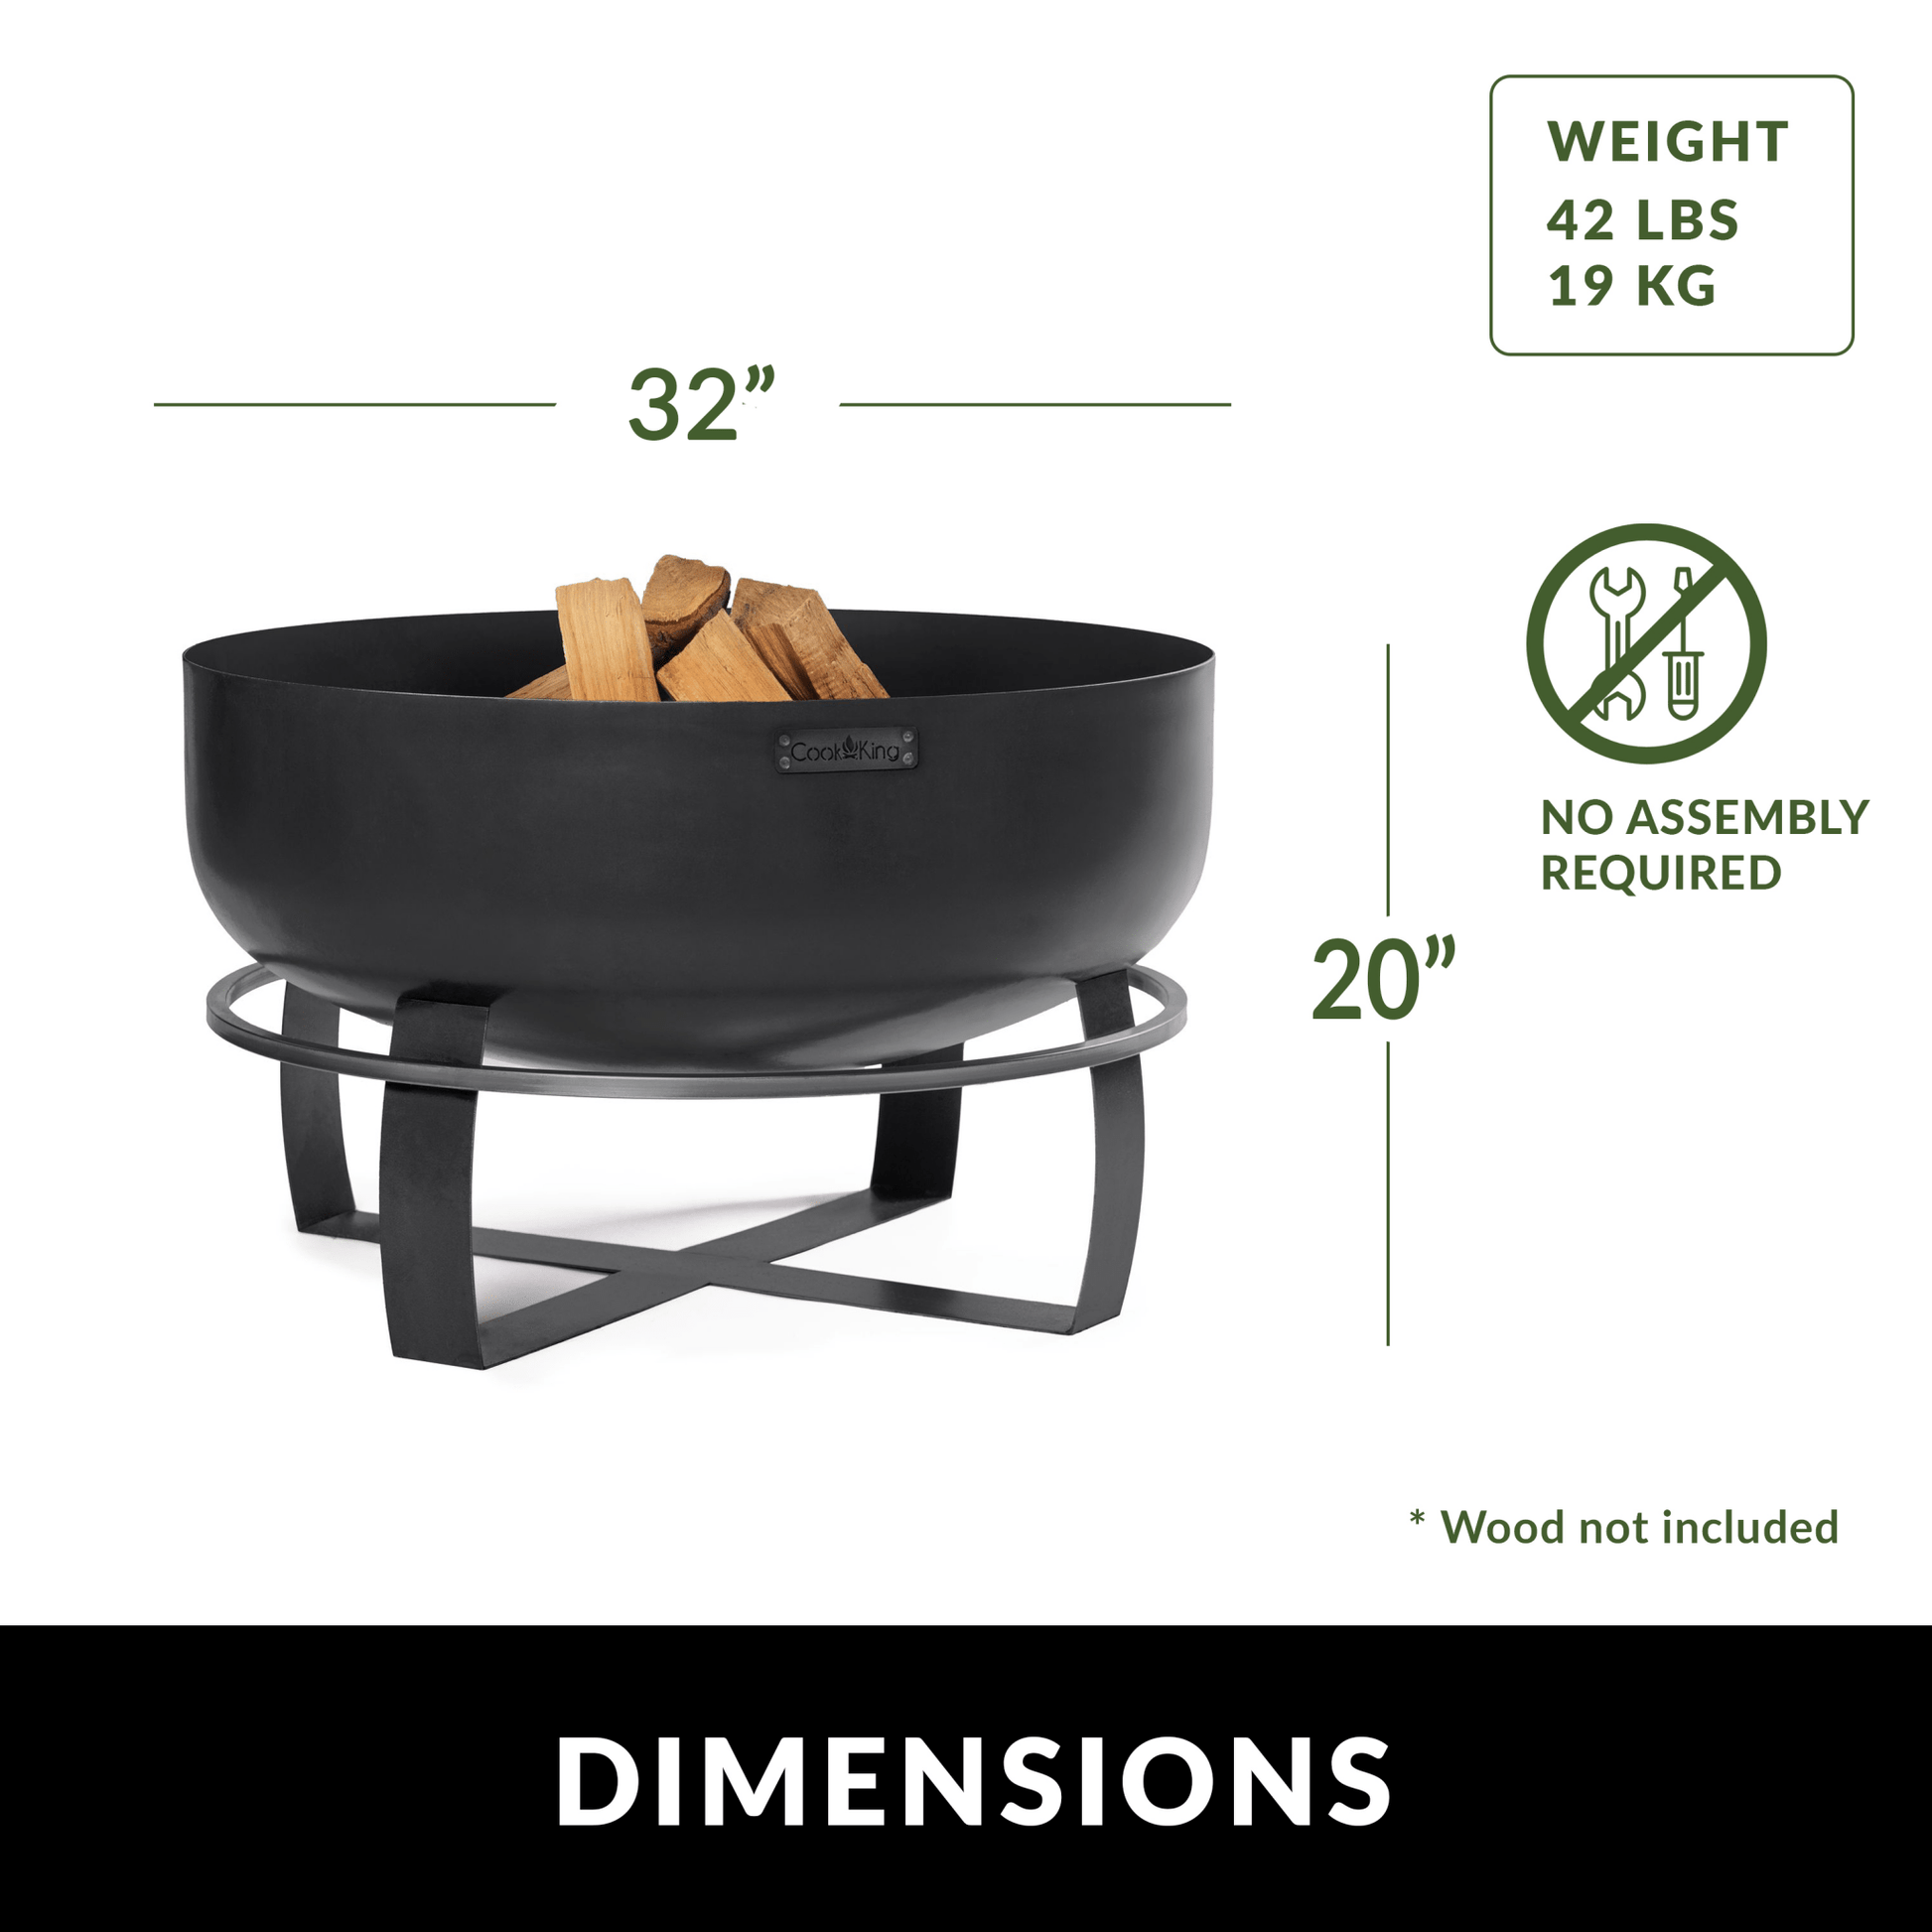 Viking 32" XXL Fire Pit with Cover Lid - Good Directions